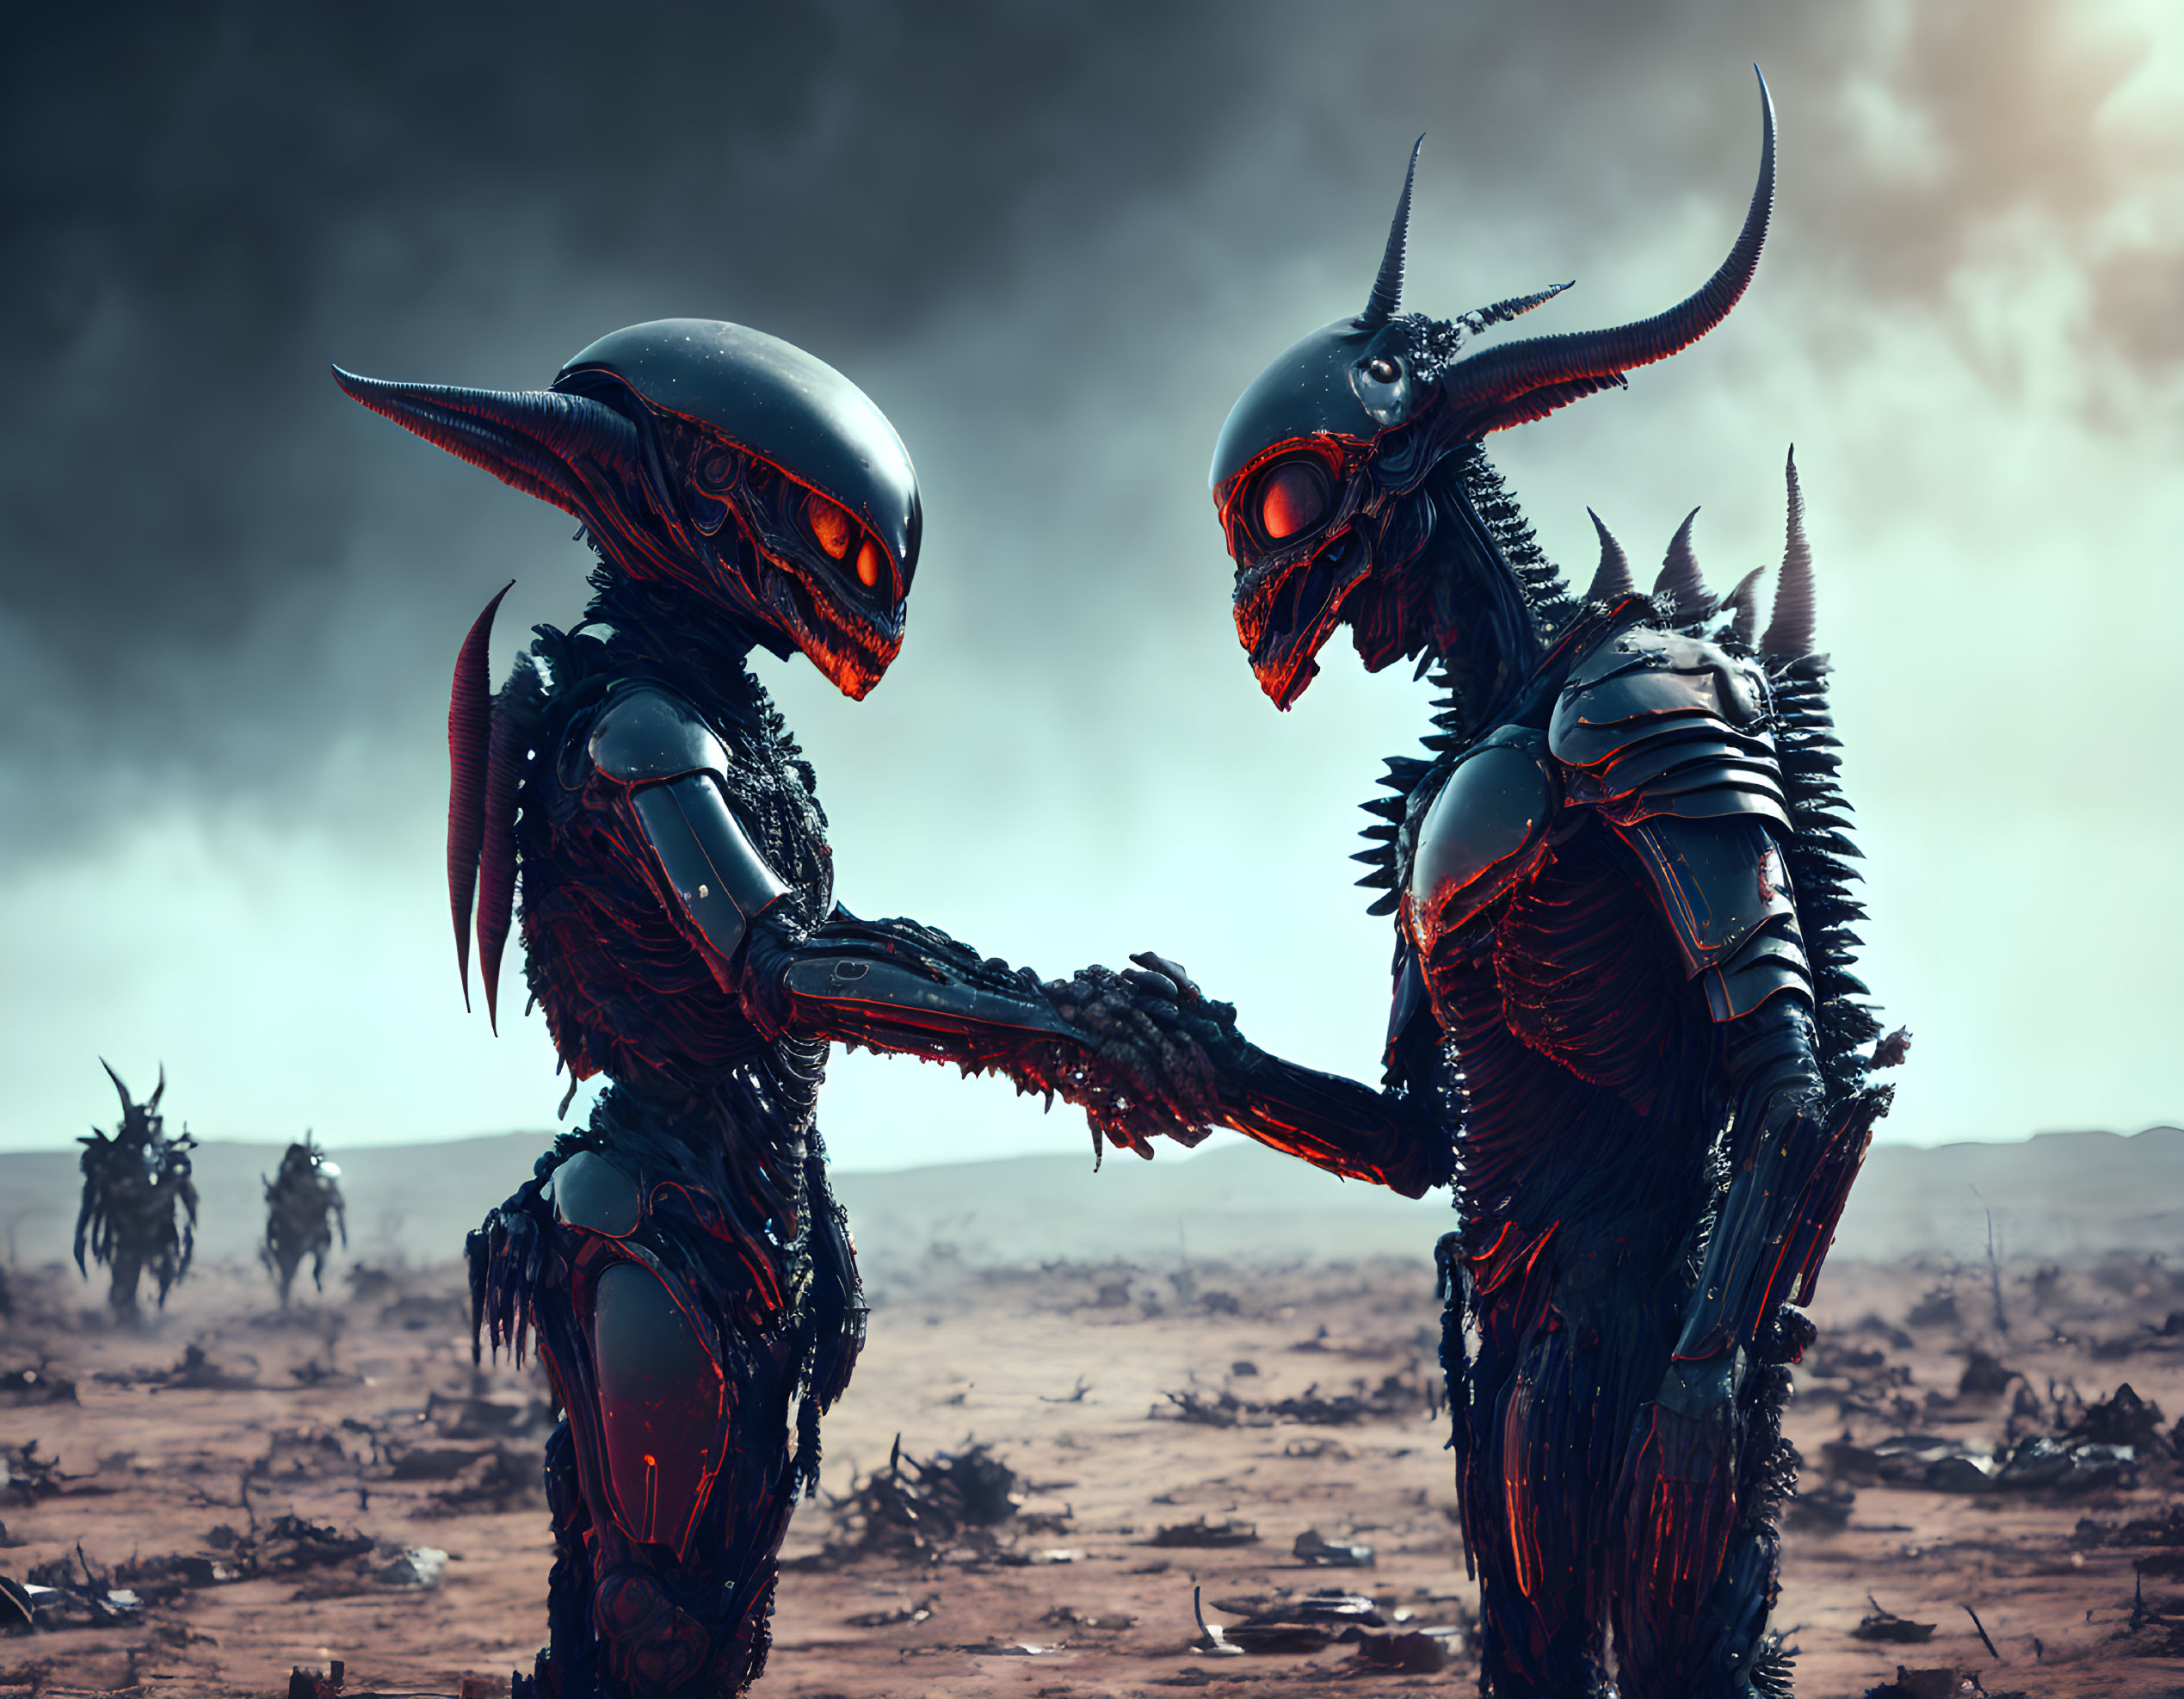 Futuristic armored alien beings with glowing red eyes shaking hands on war-torn landscape